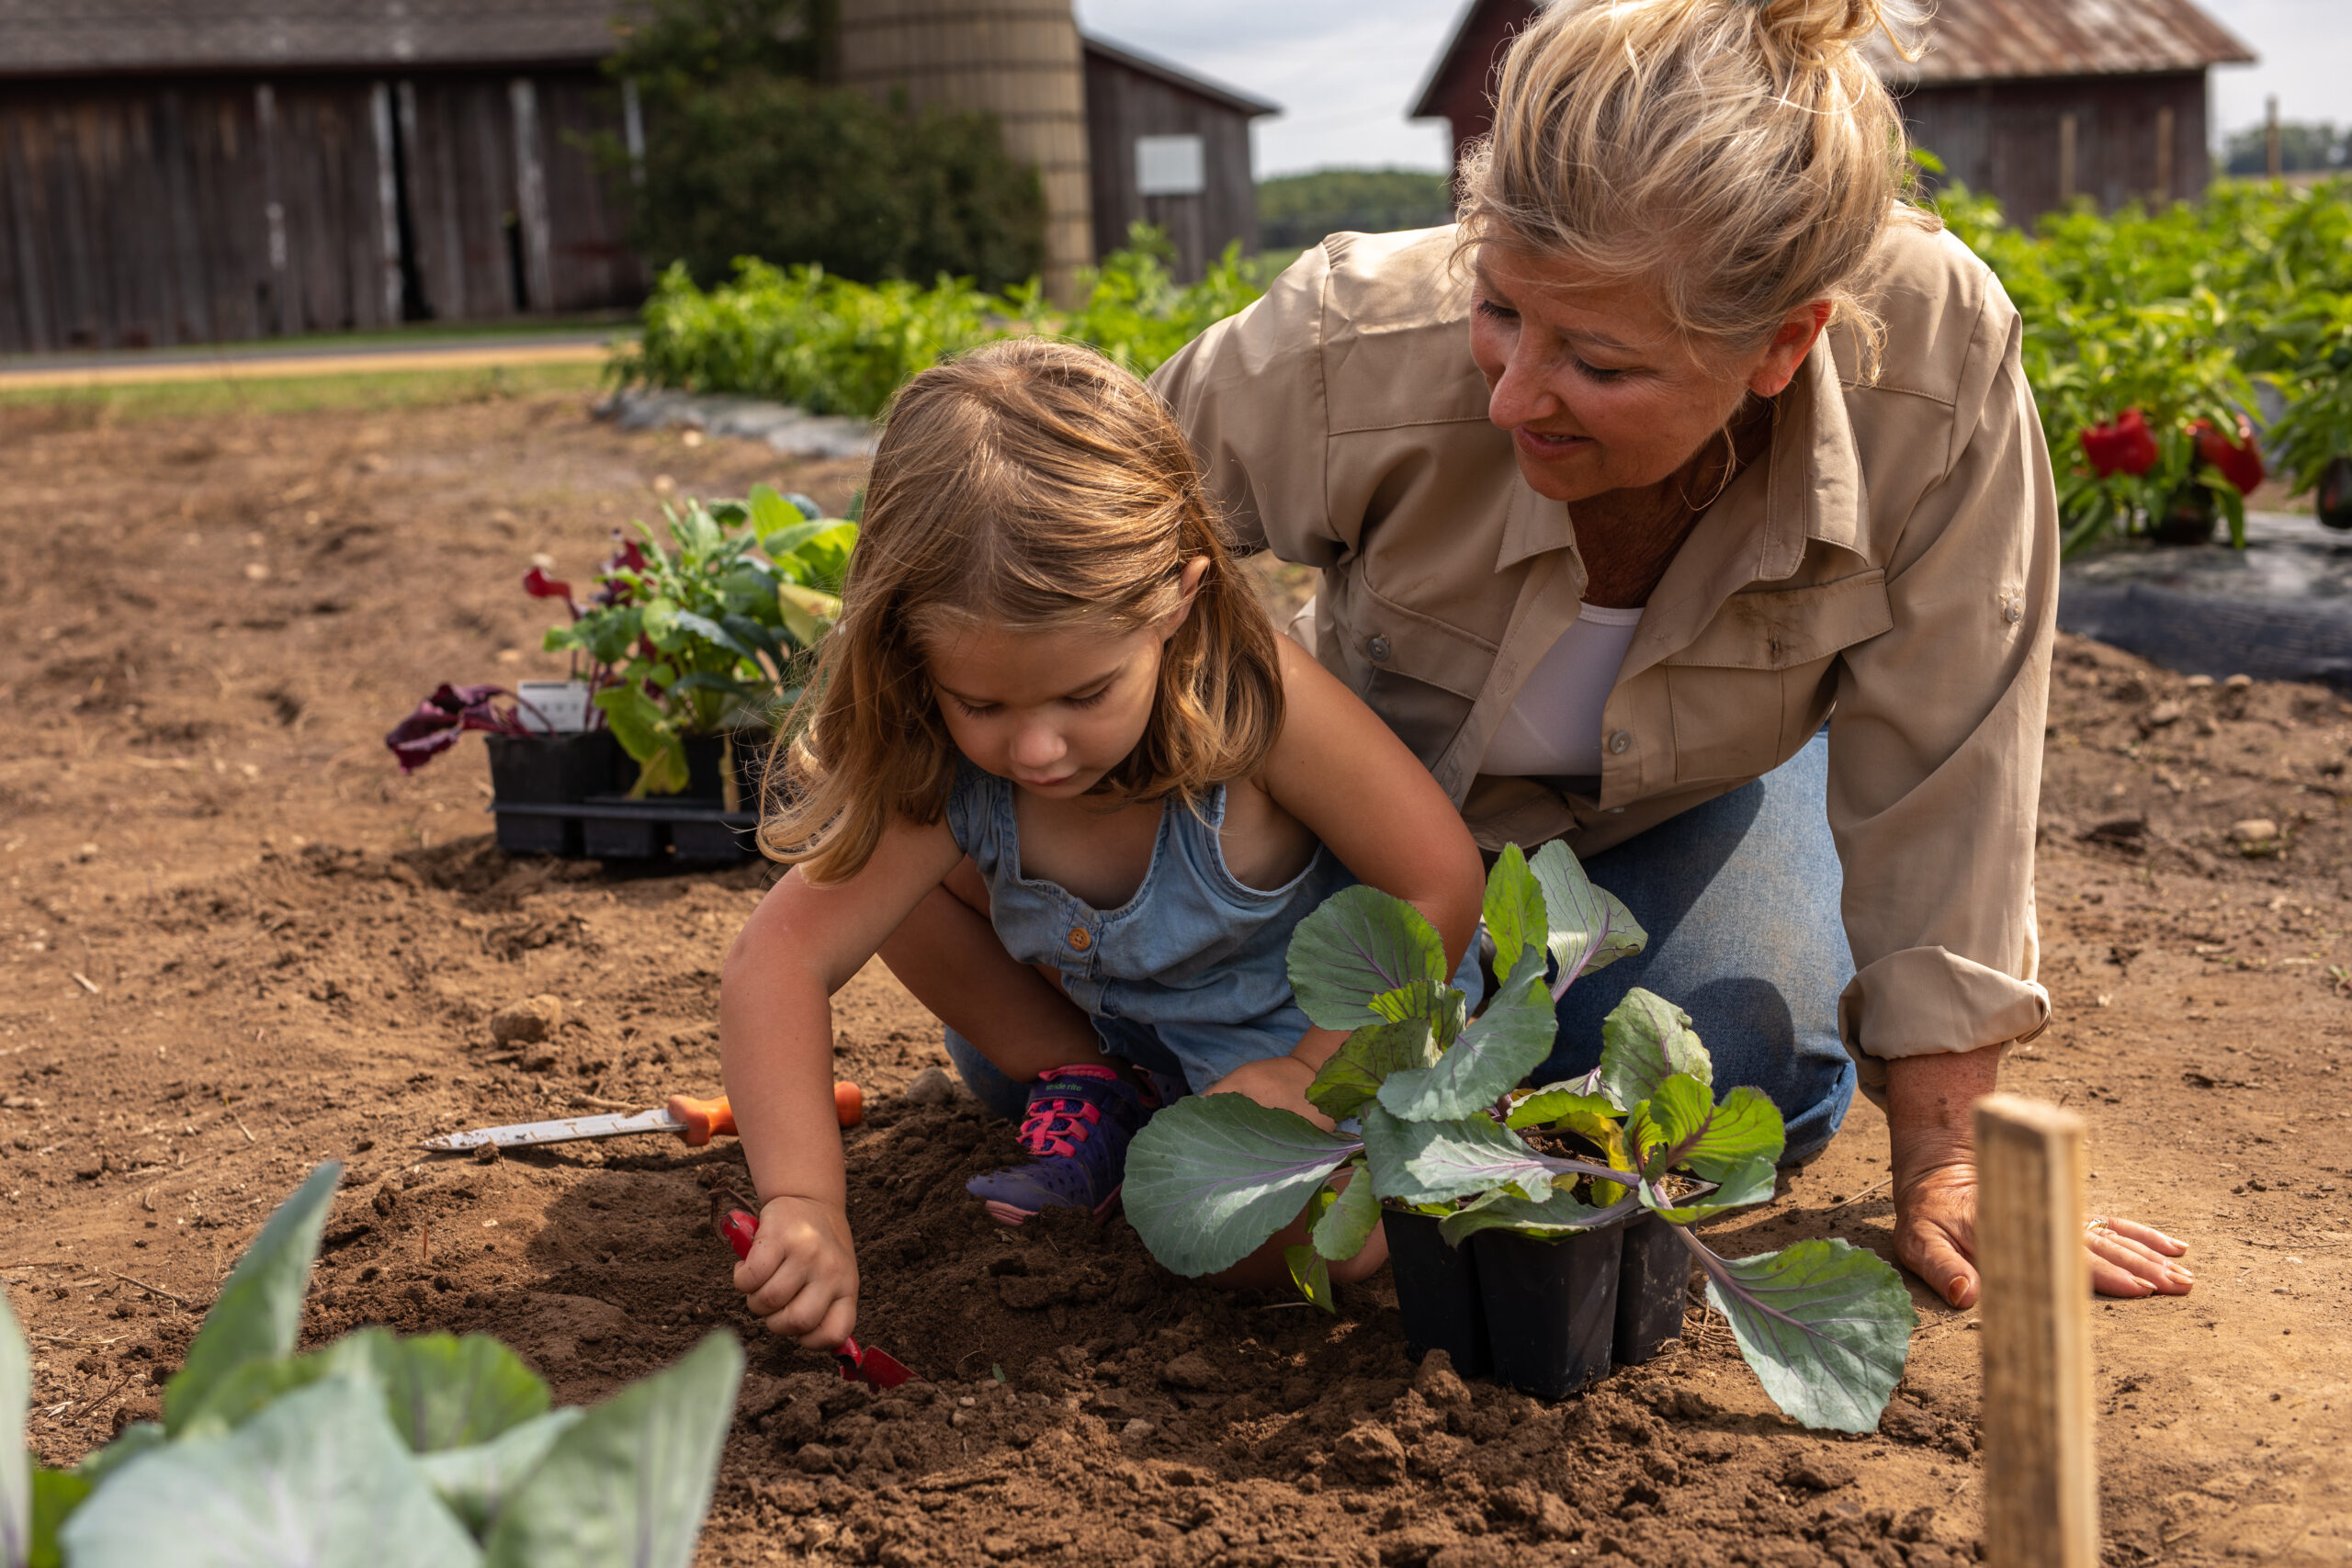 Grandmother and granddaughter sitting in garden planting a plant